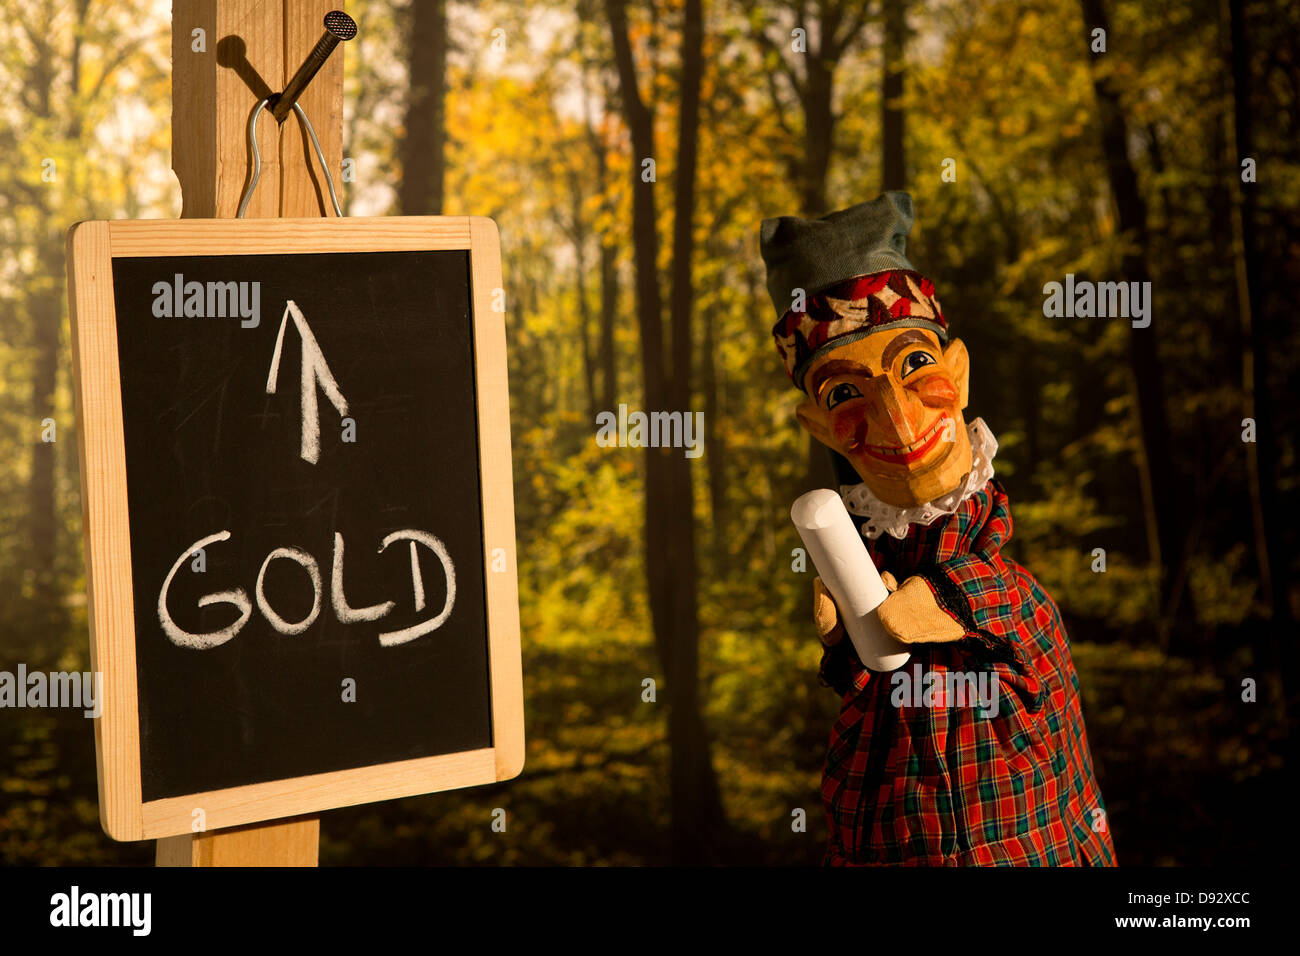 Punch from the Punch and Judy standing next to a board with Gold written on it Stock Photo